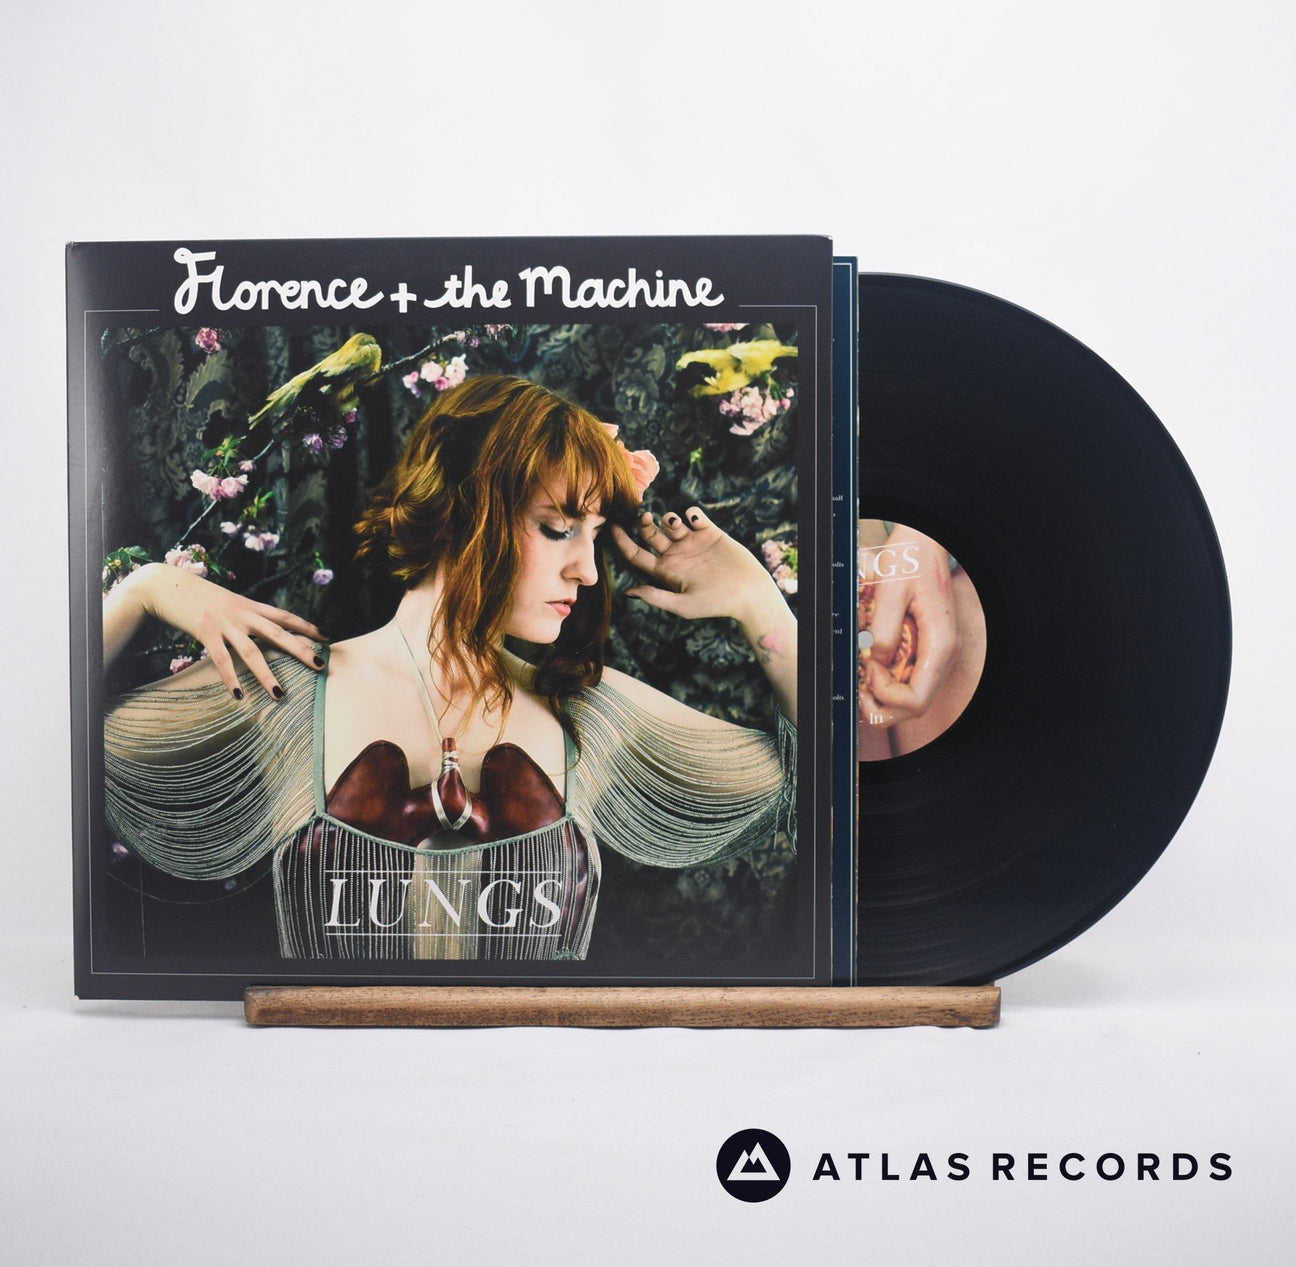 Florence And The Machine Lungs LP Vinyl Record - Front Cover & Record